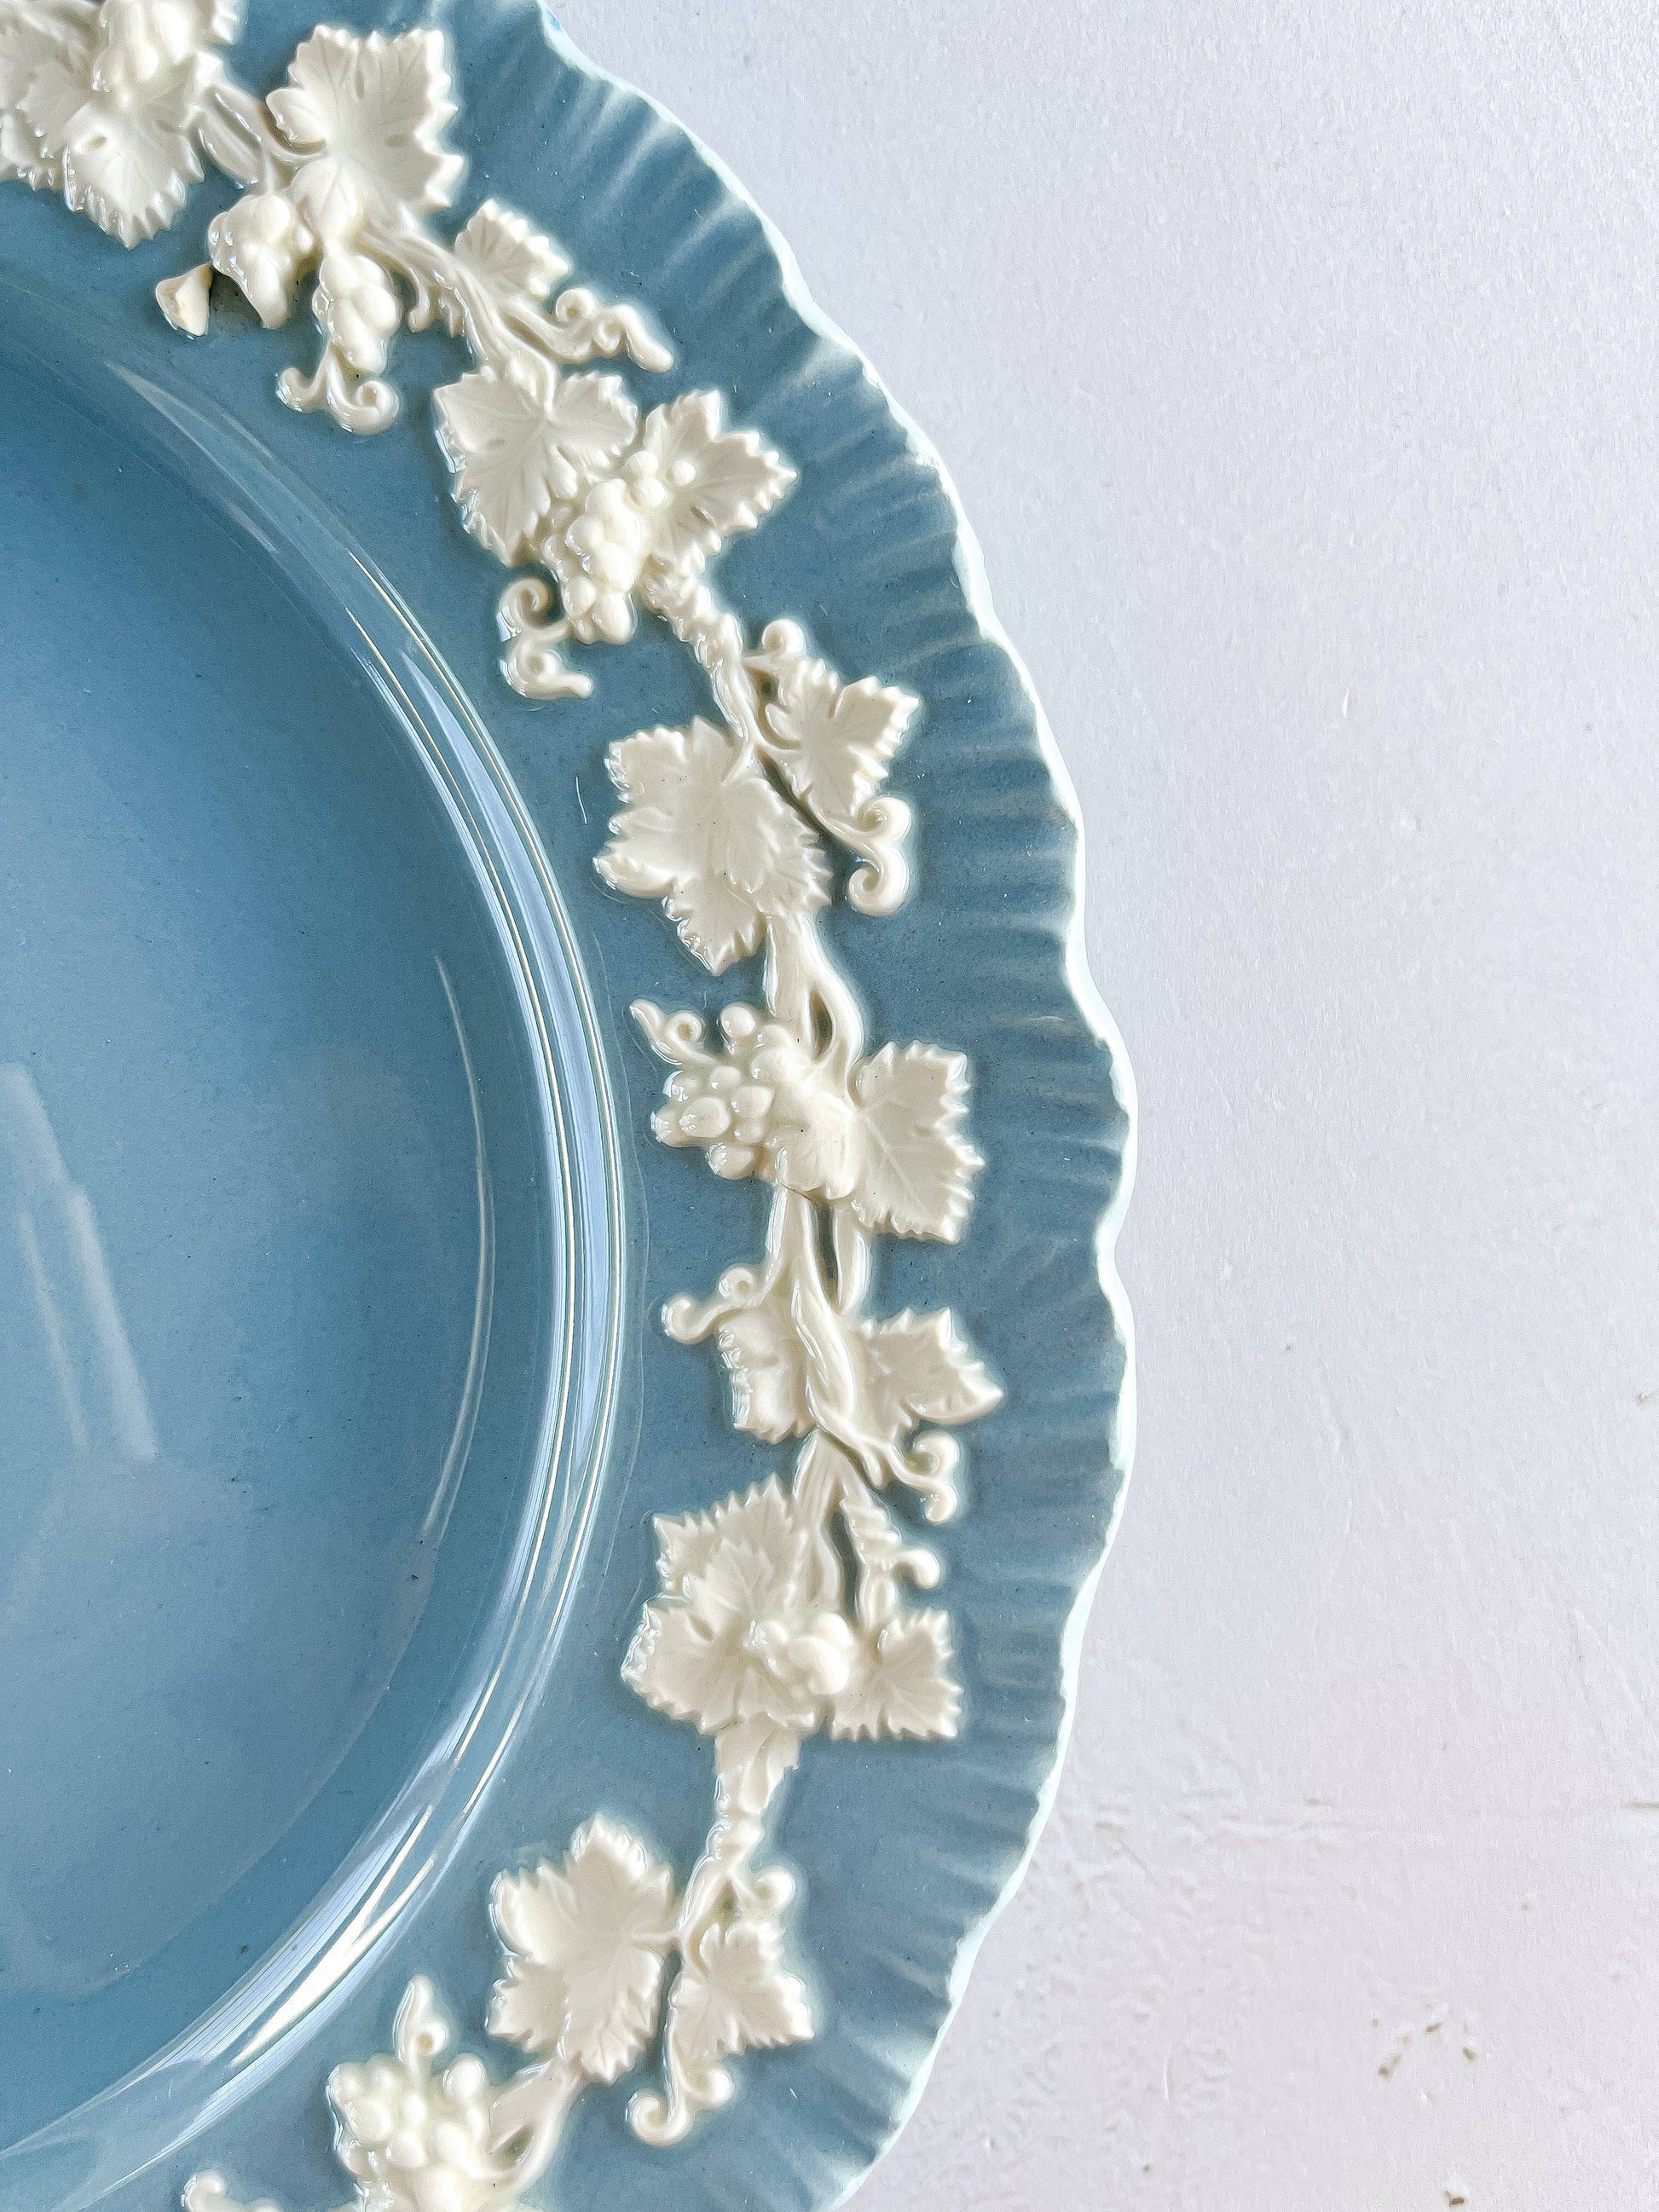 Wedgwood Queen’s Ware Embossed Salad Plate in Pastel Blue - SOSC Home